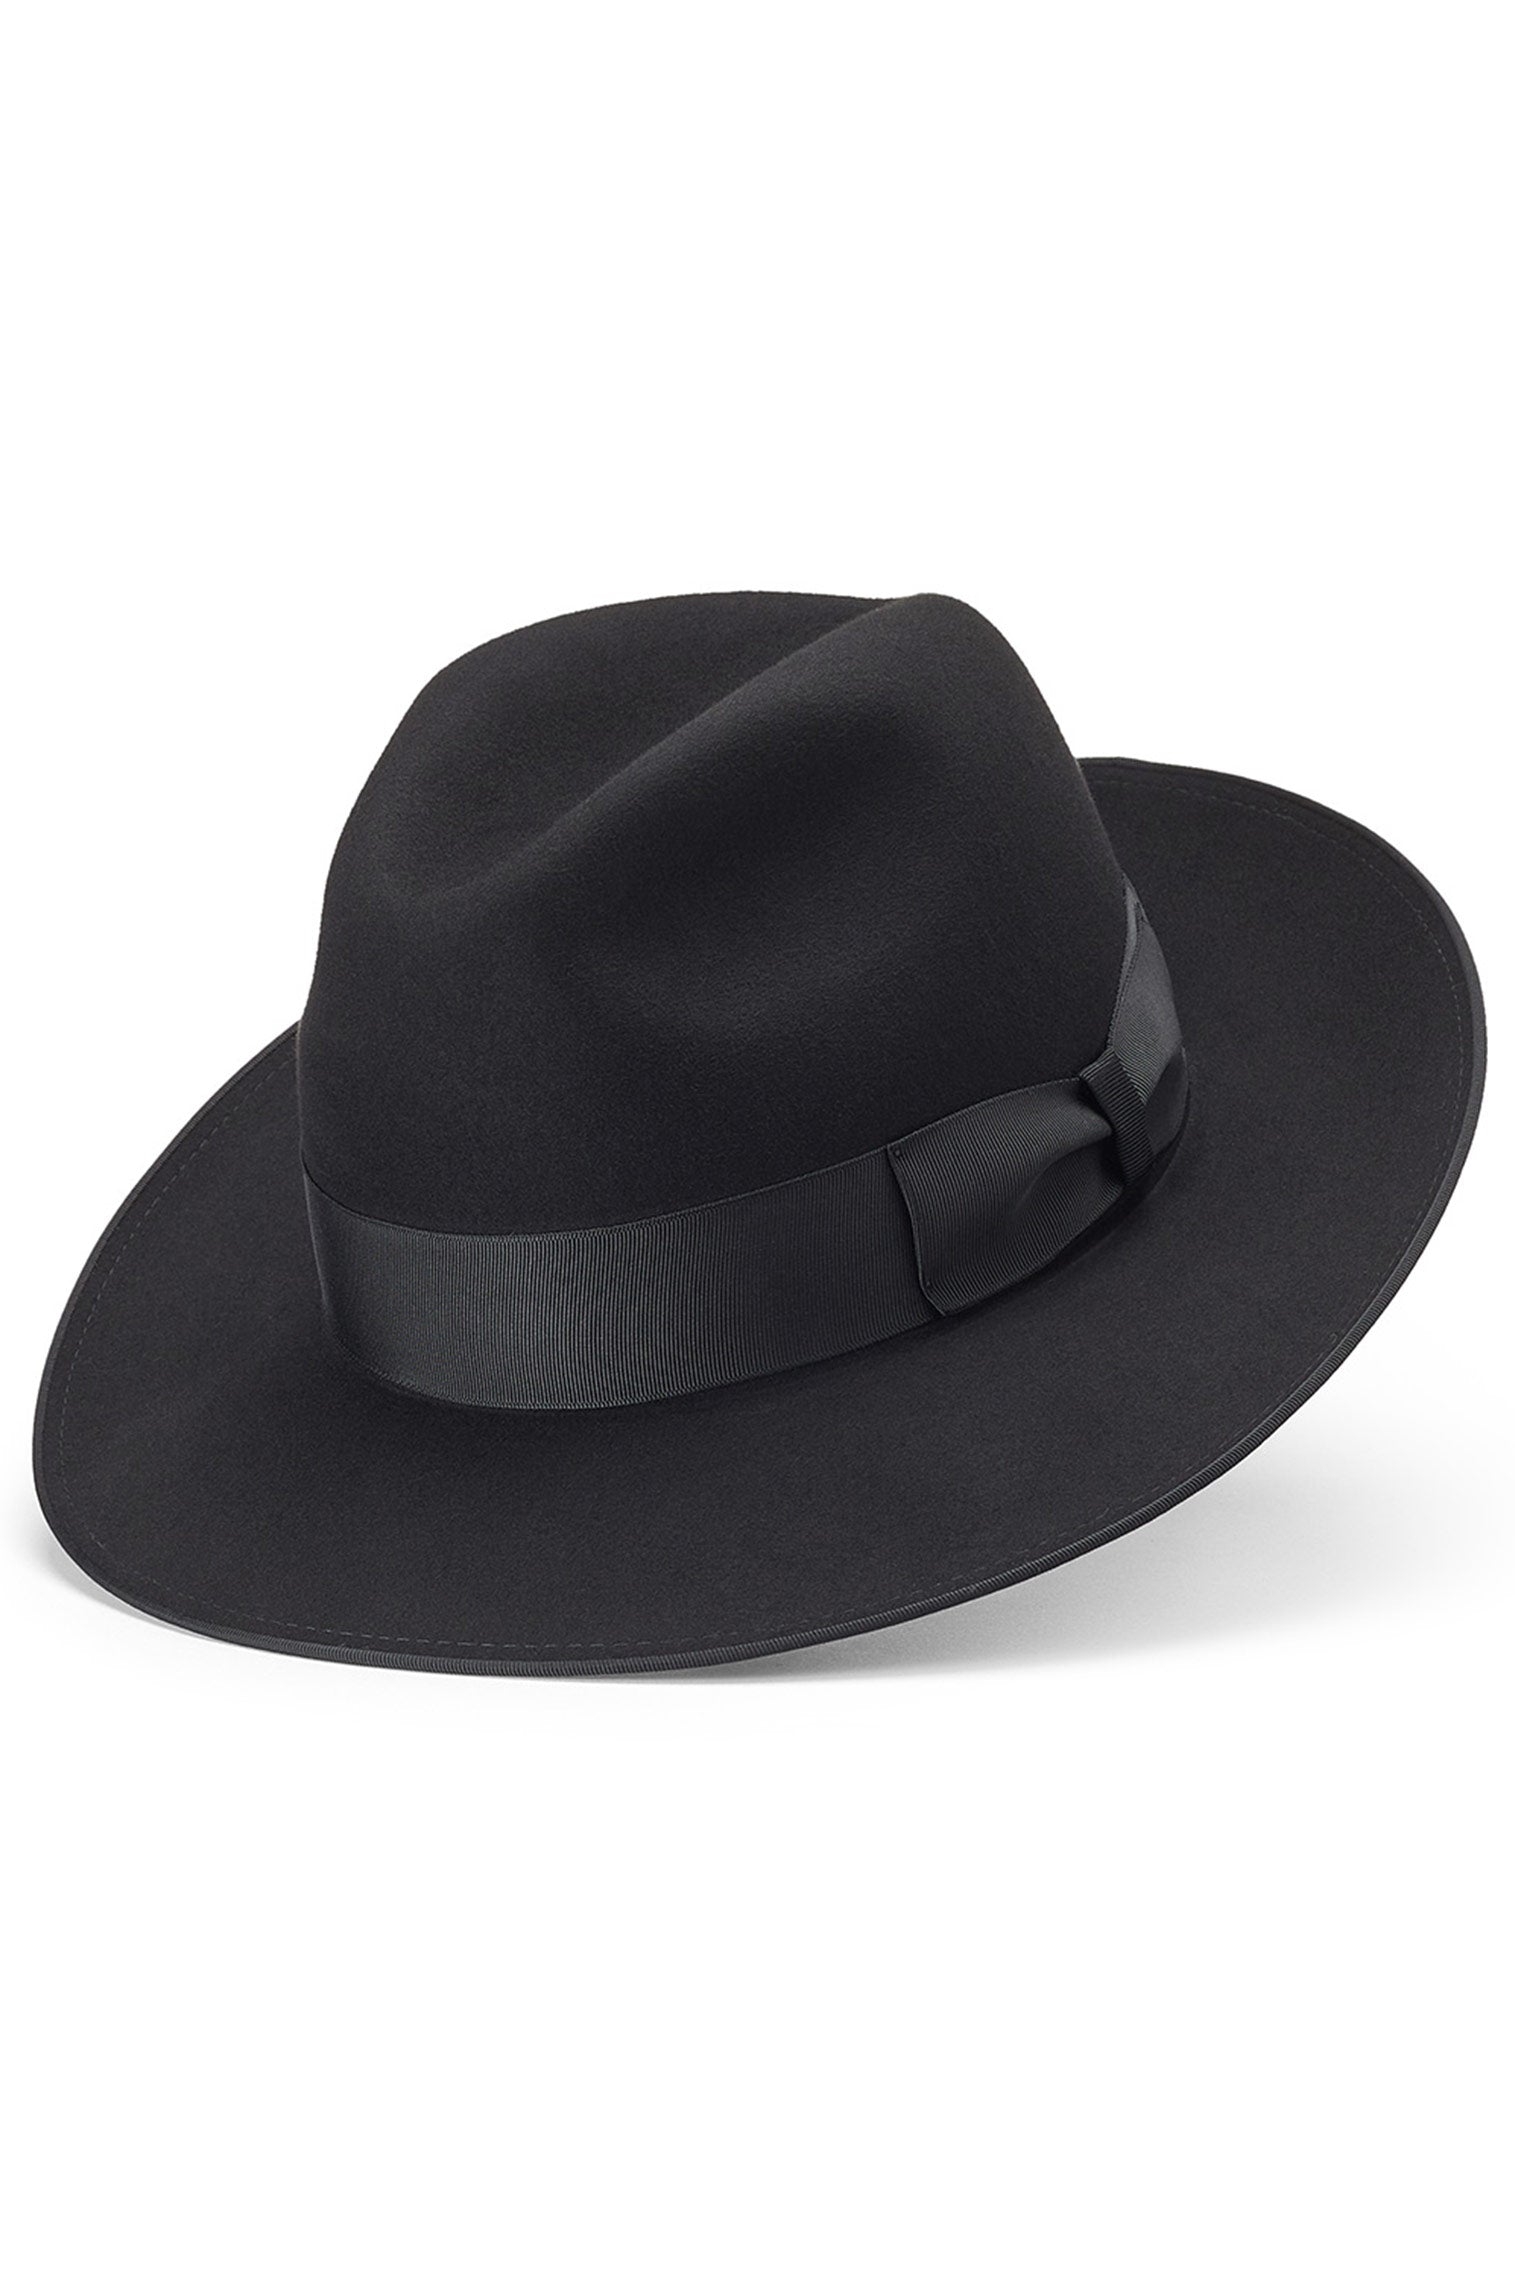 St James's Black Fedora - Hats for Tall People - Lock & Co. Hatters London UK